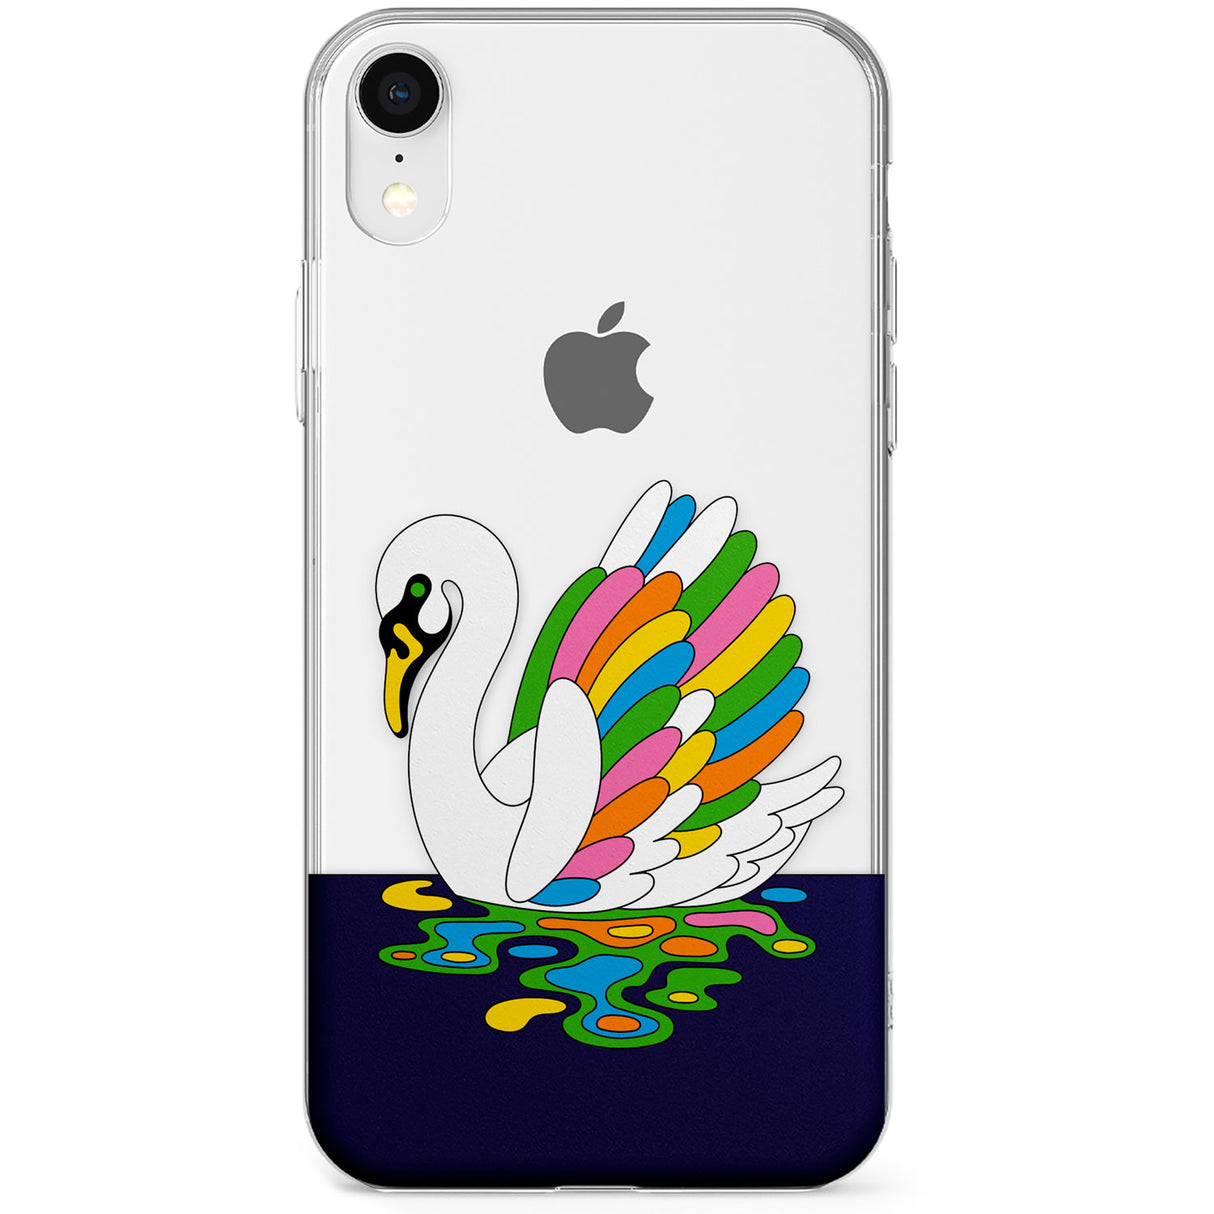 Serene Swan Phone Case for iPhone X, XS Max, XR